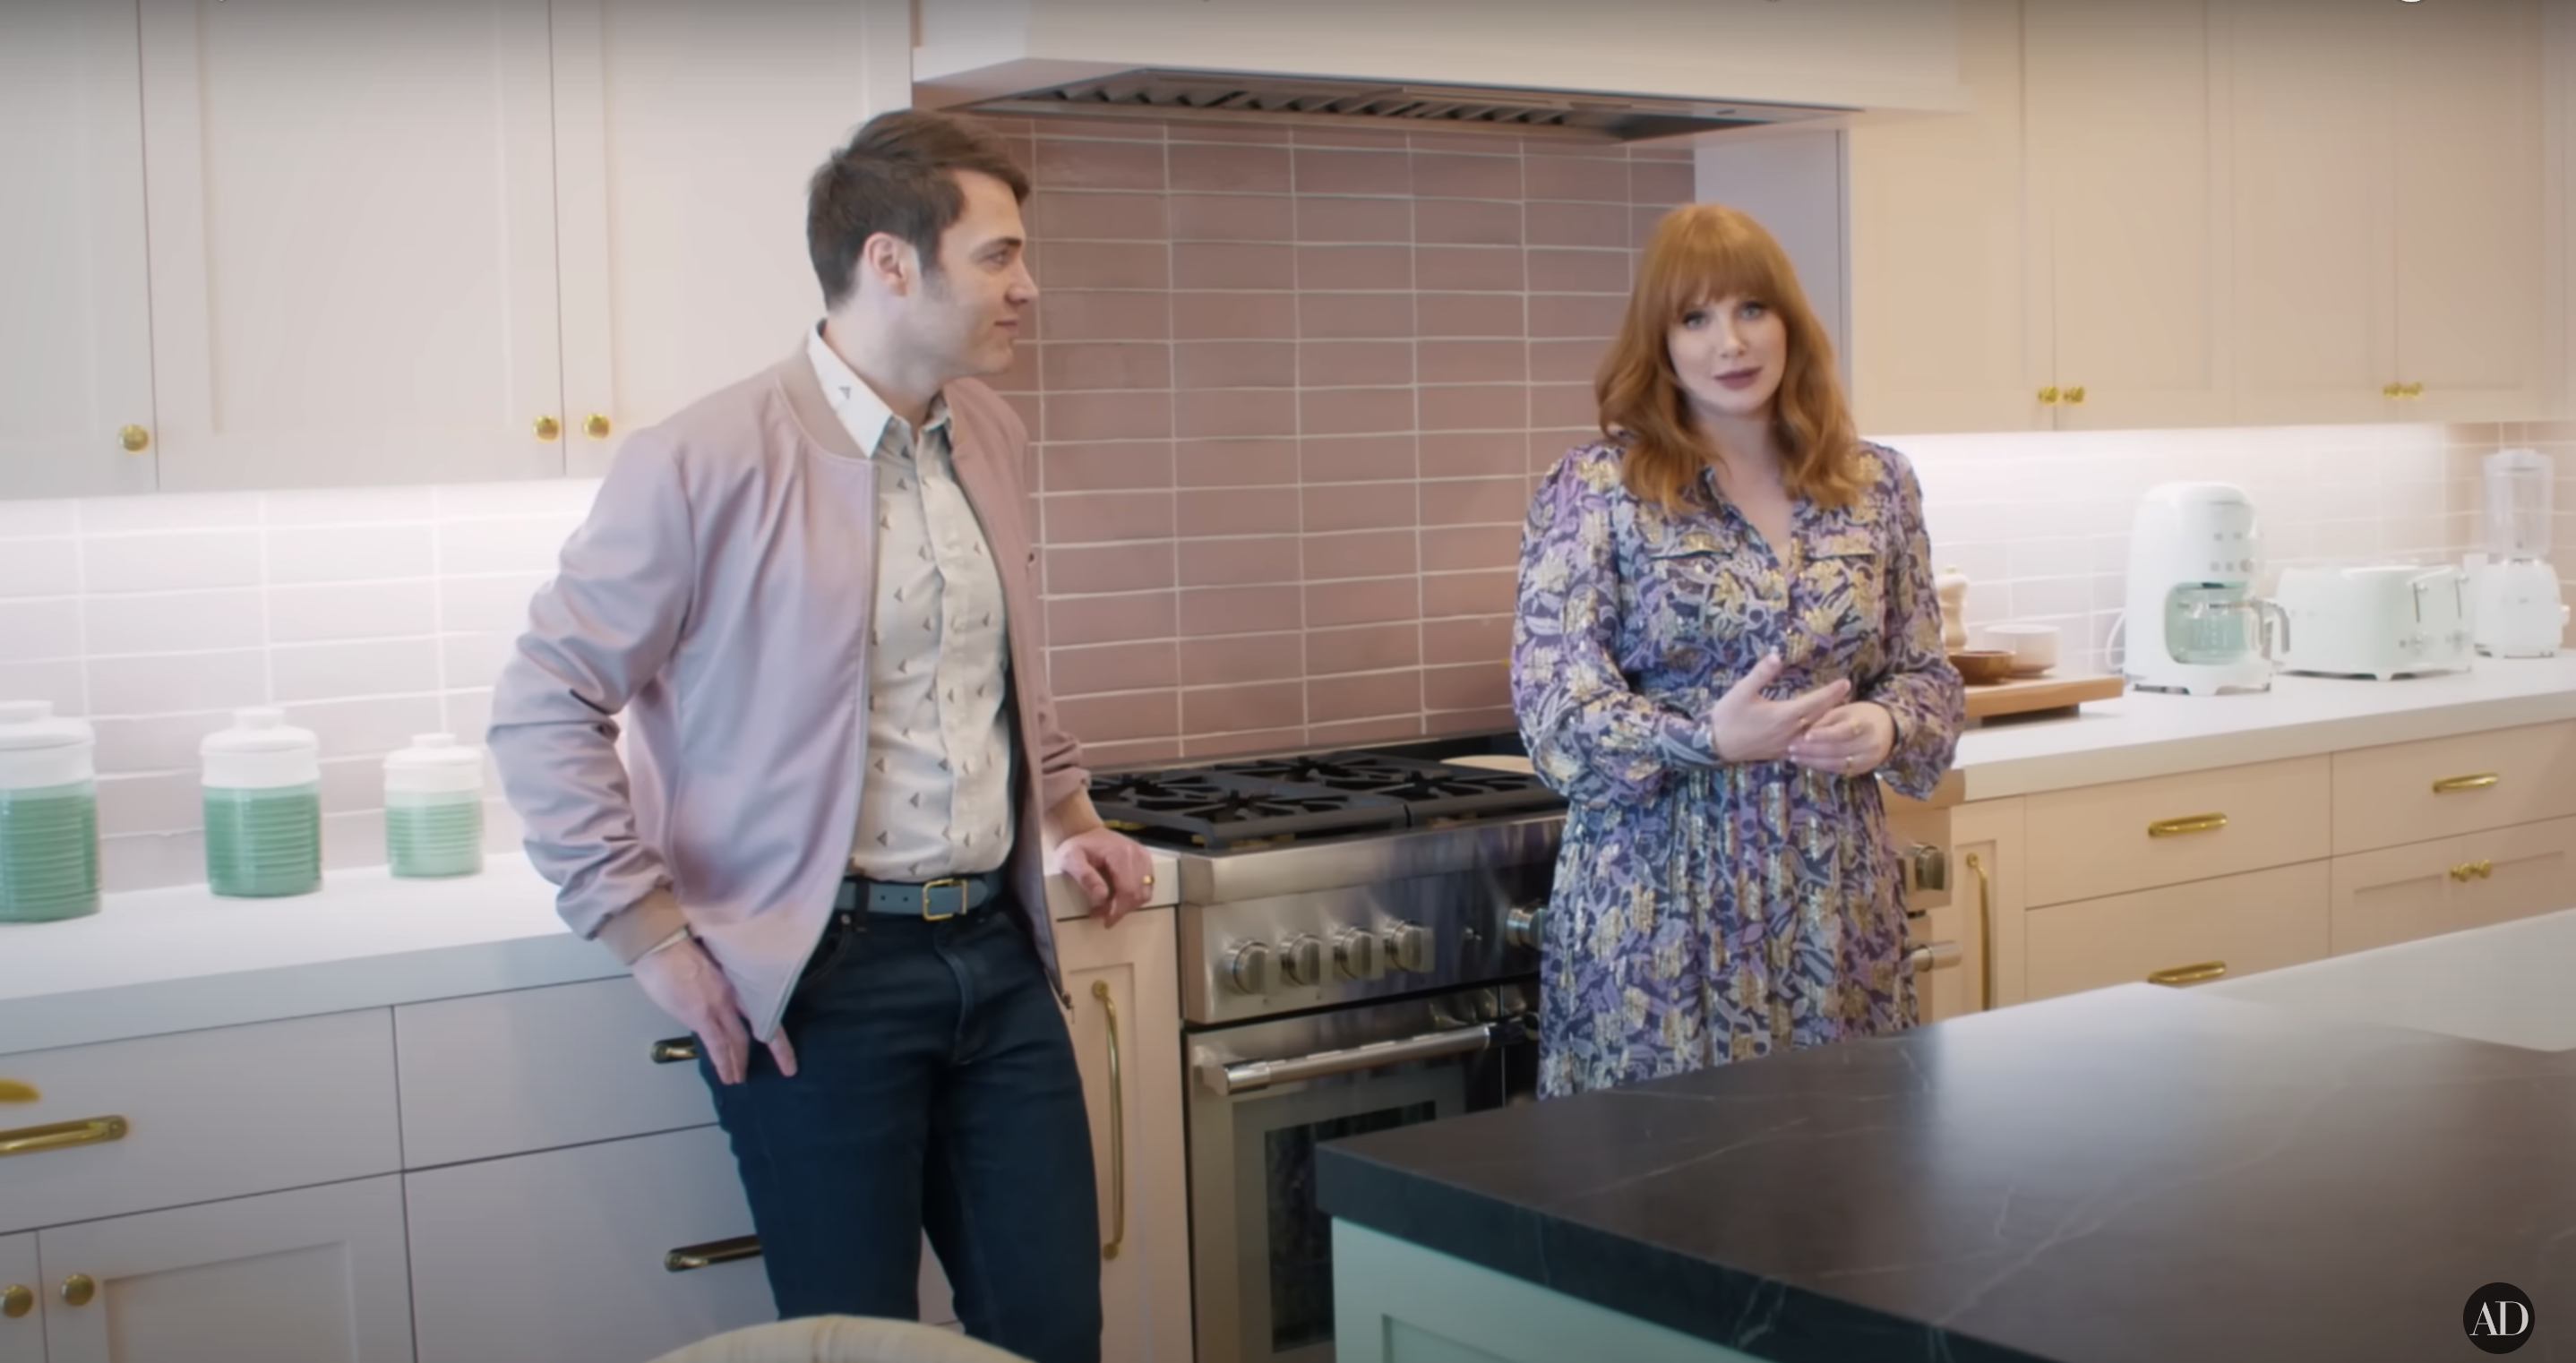 The kitchen in Bryce Howard Dallas and Seth Gabel's Los Angeles Home | Source: https://www.youtube.com/@Archdigest